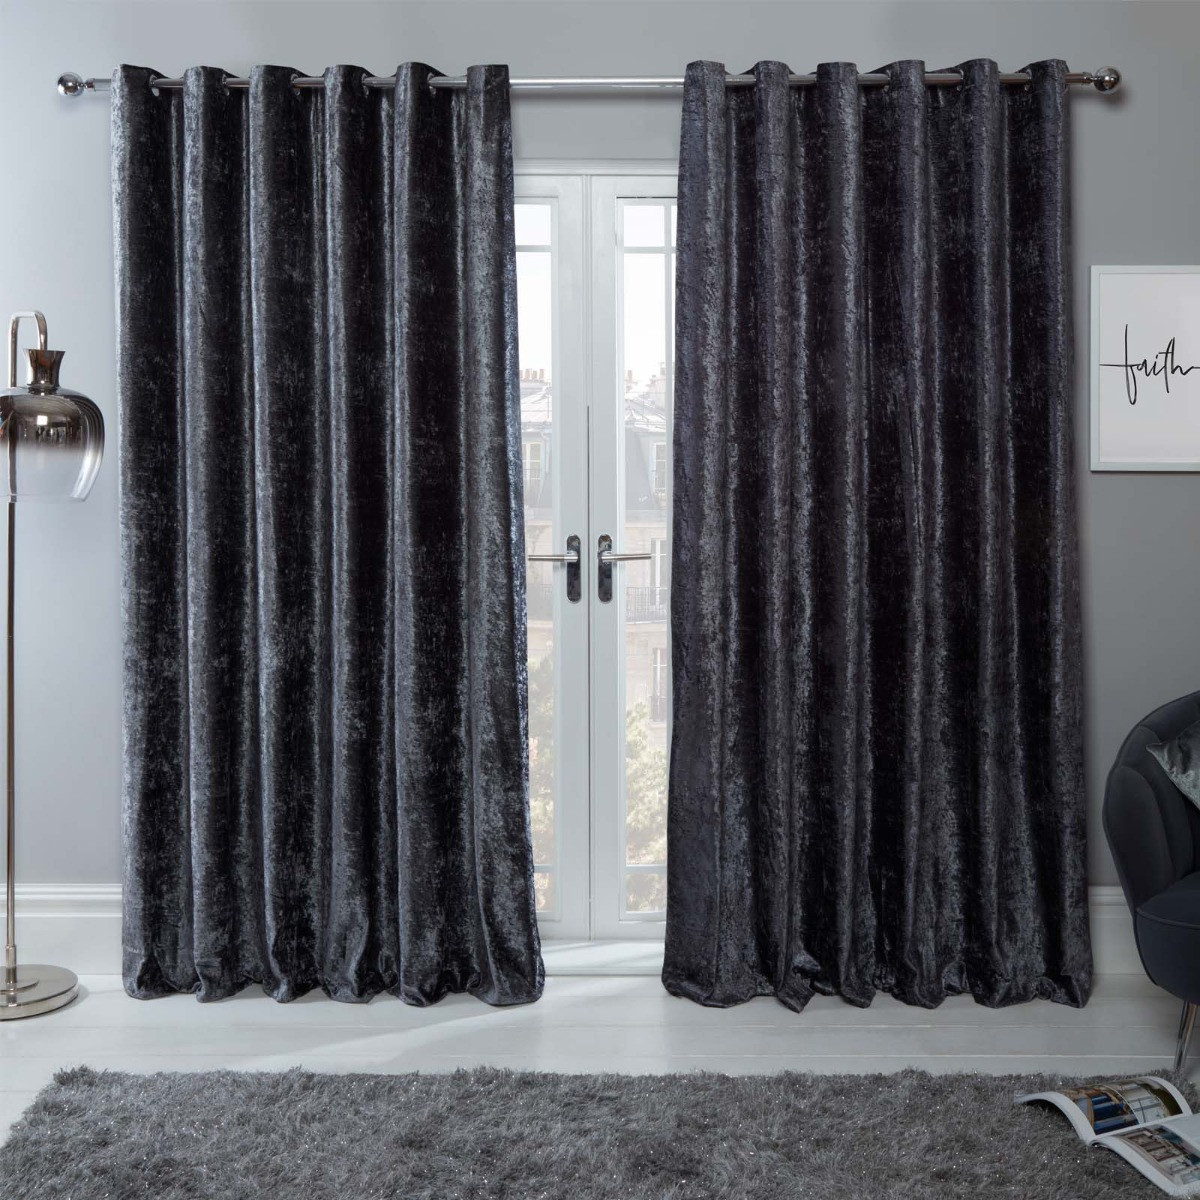 Sienna Home Crushed Velvet Eyelet Curtains - Charcoal Grey 66" x 72">